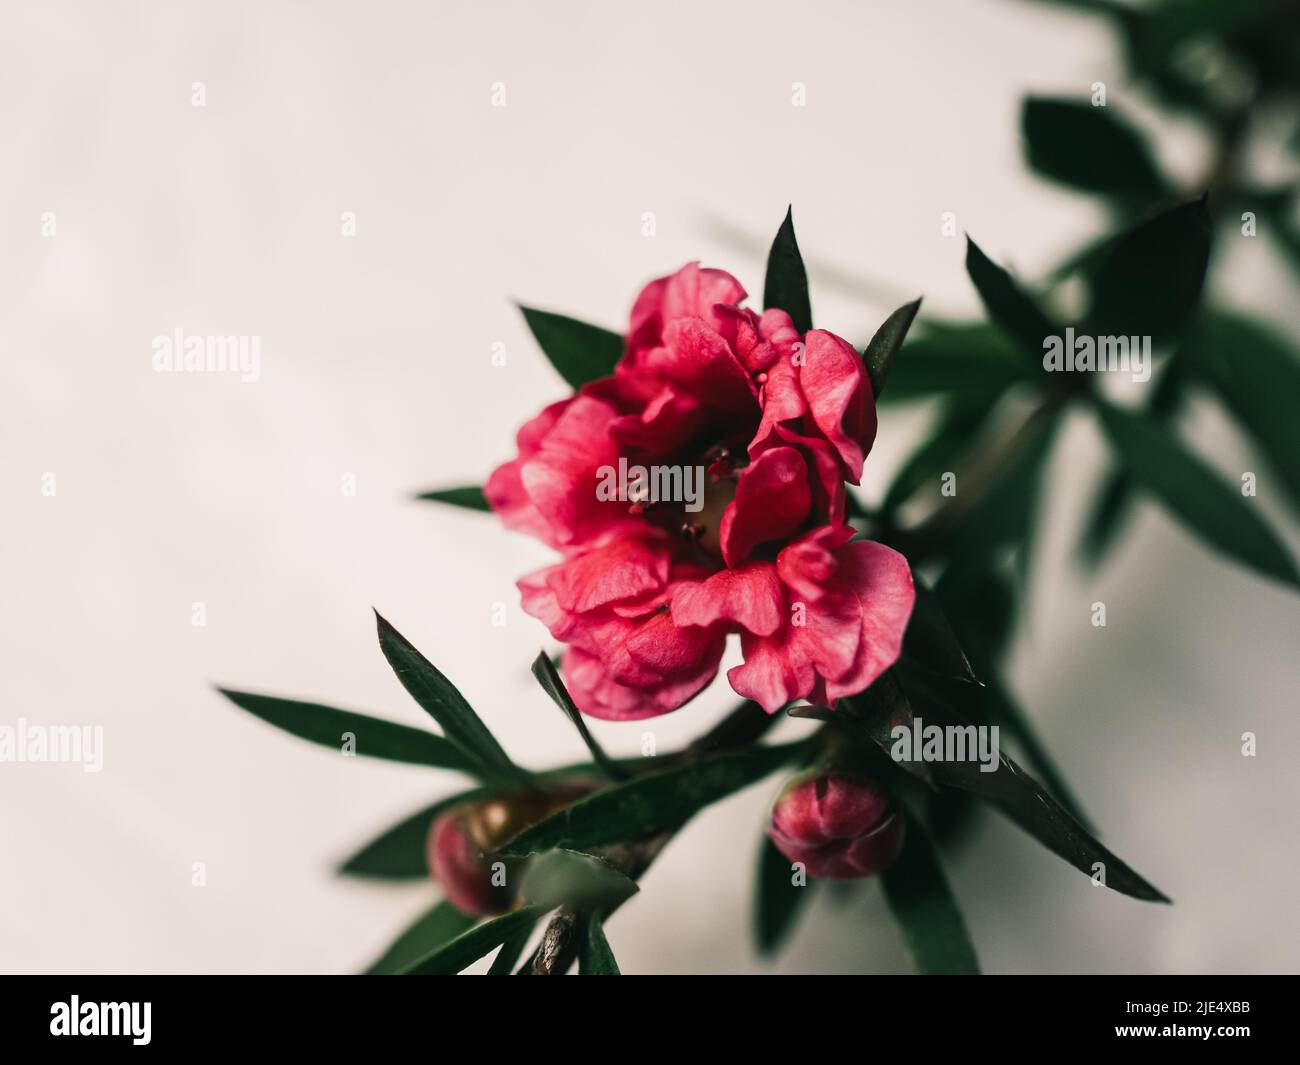 Red flower symbolizes love, passion, beauty, or power Stock Photo